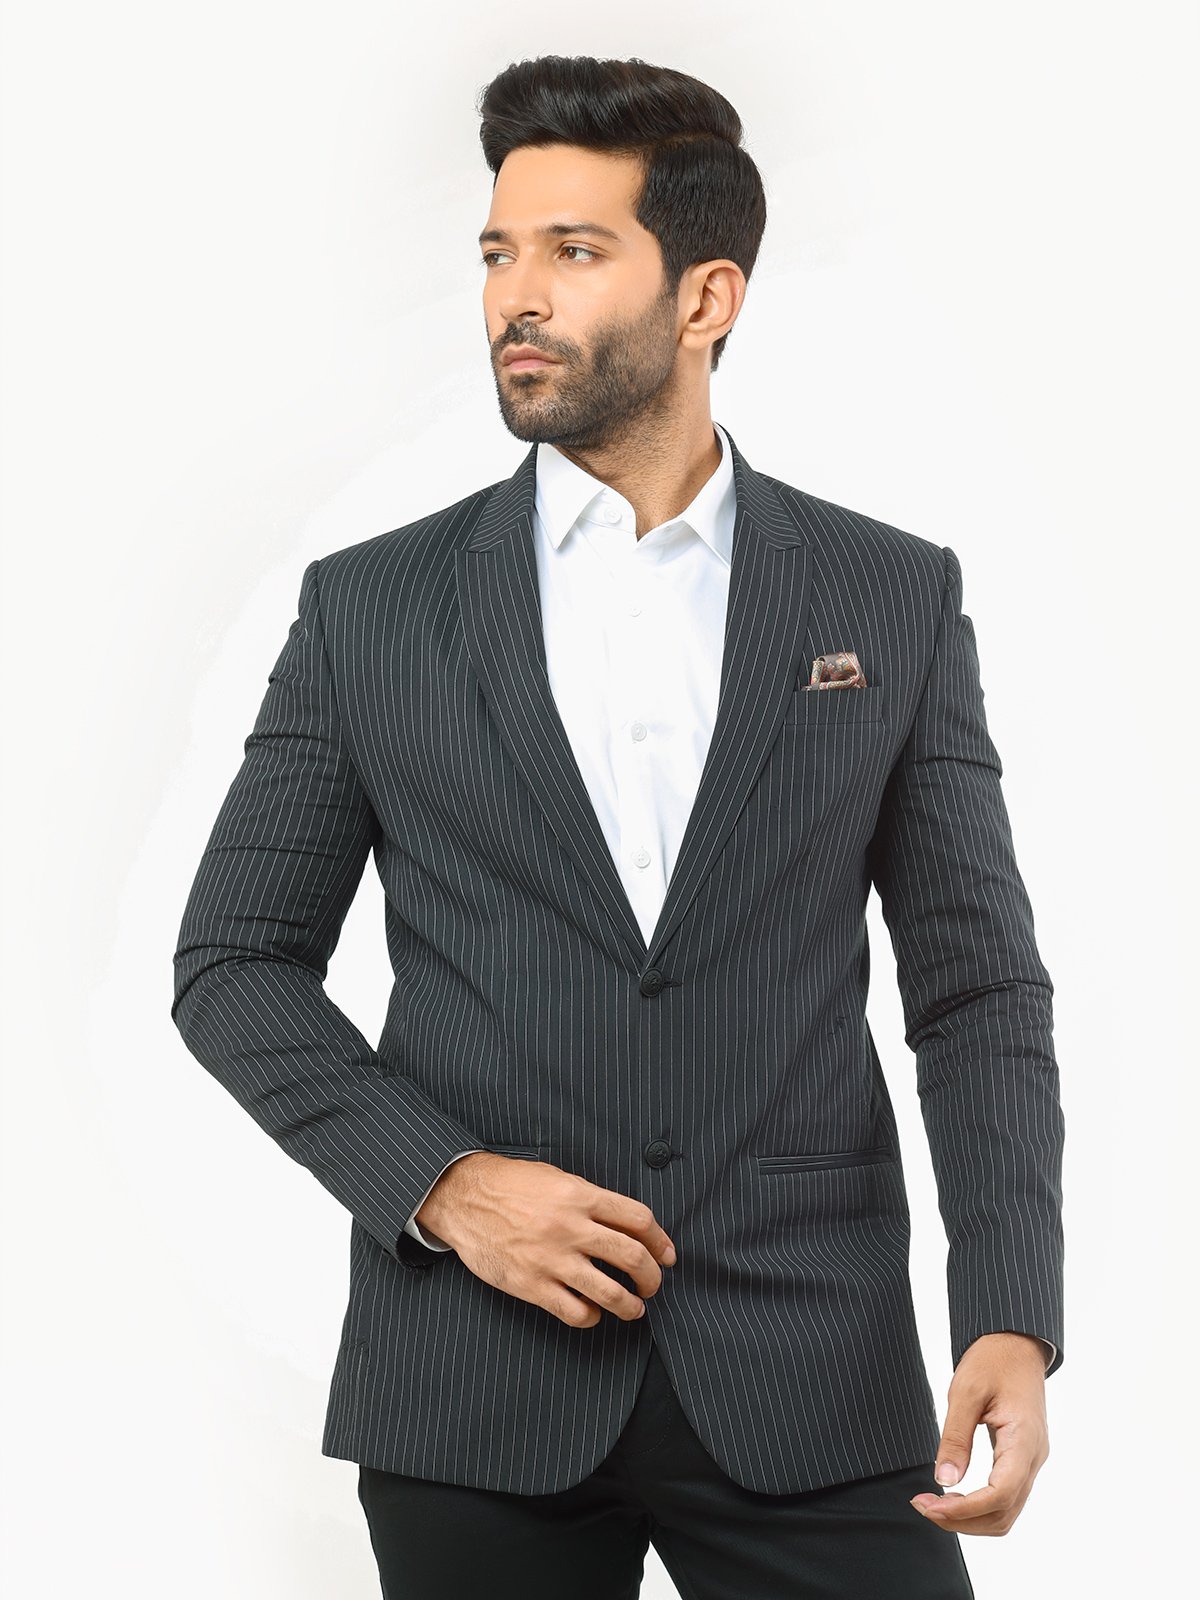 What color blazer would go with a white shirt and black trousers? - Quora